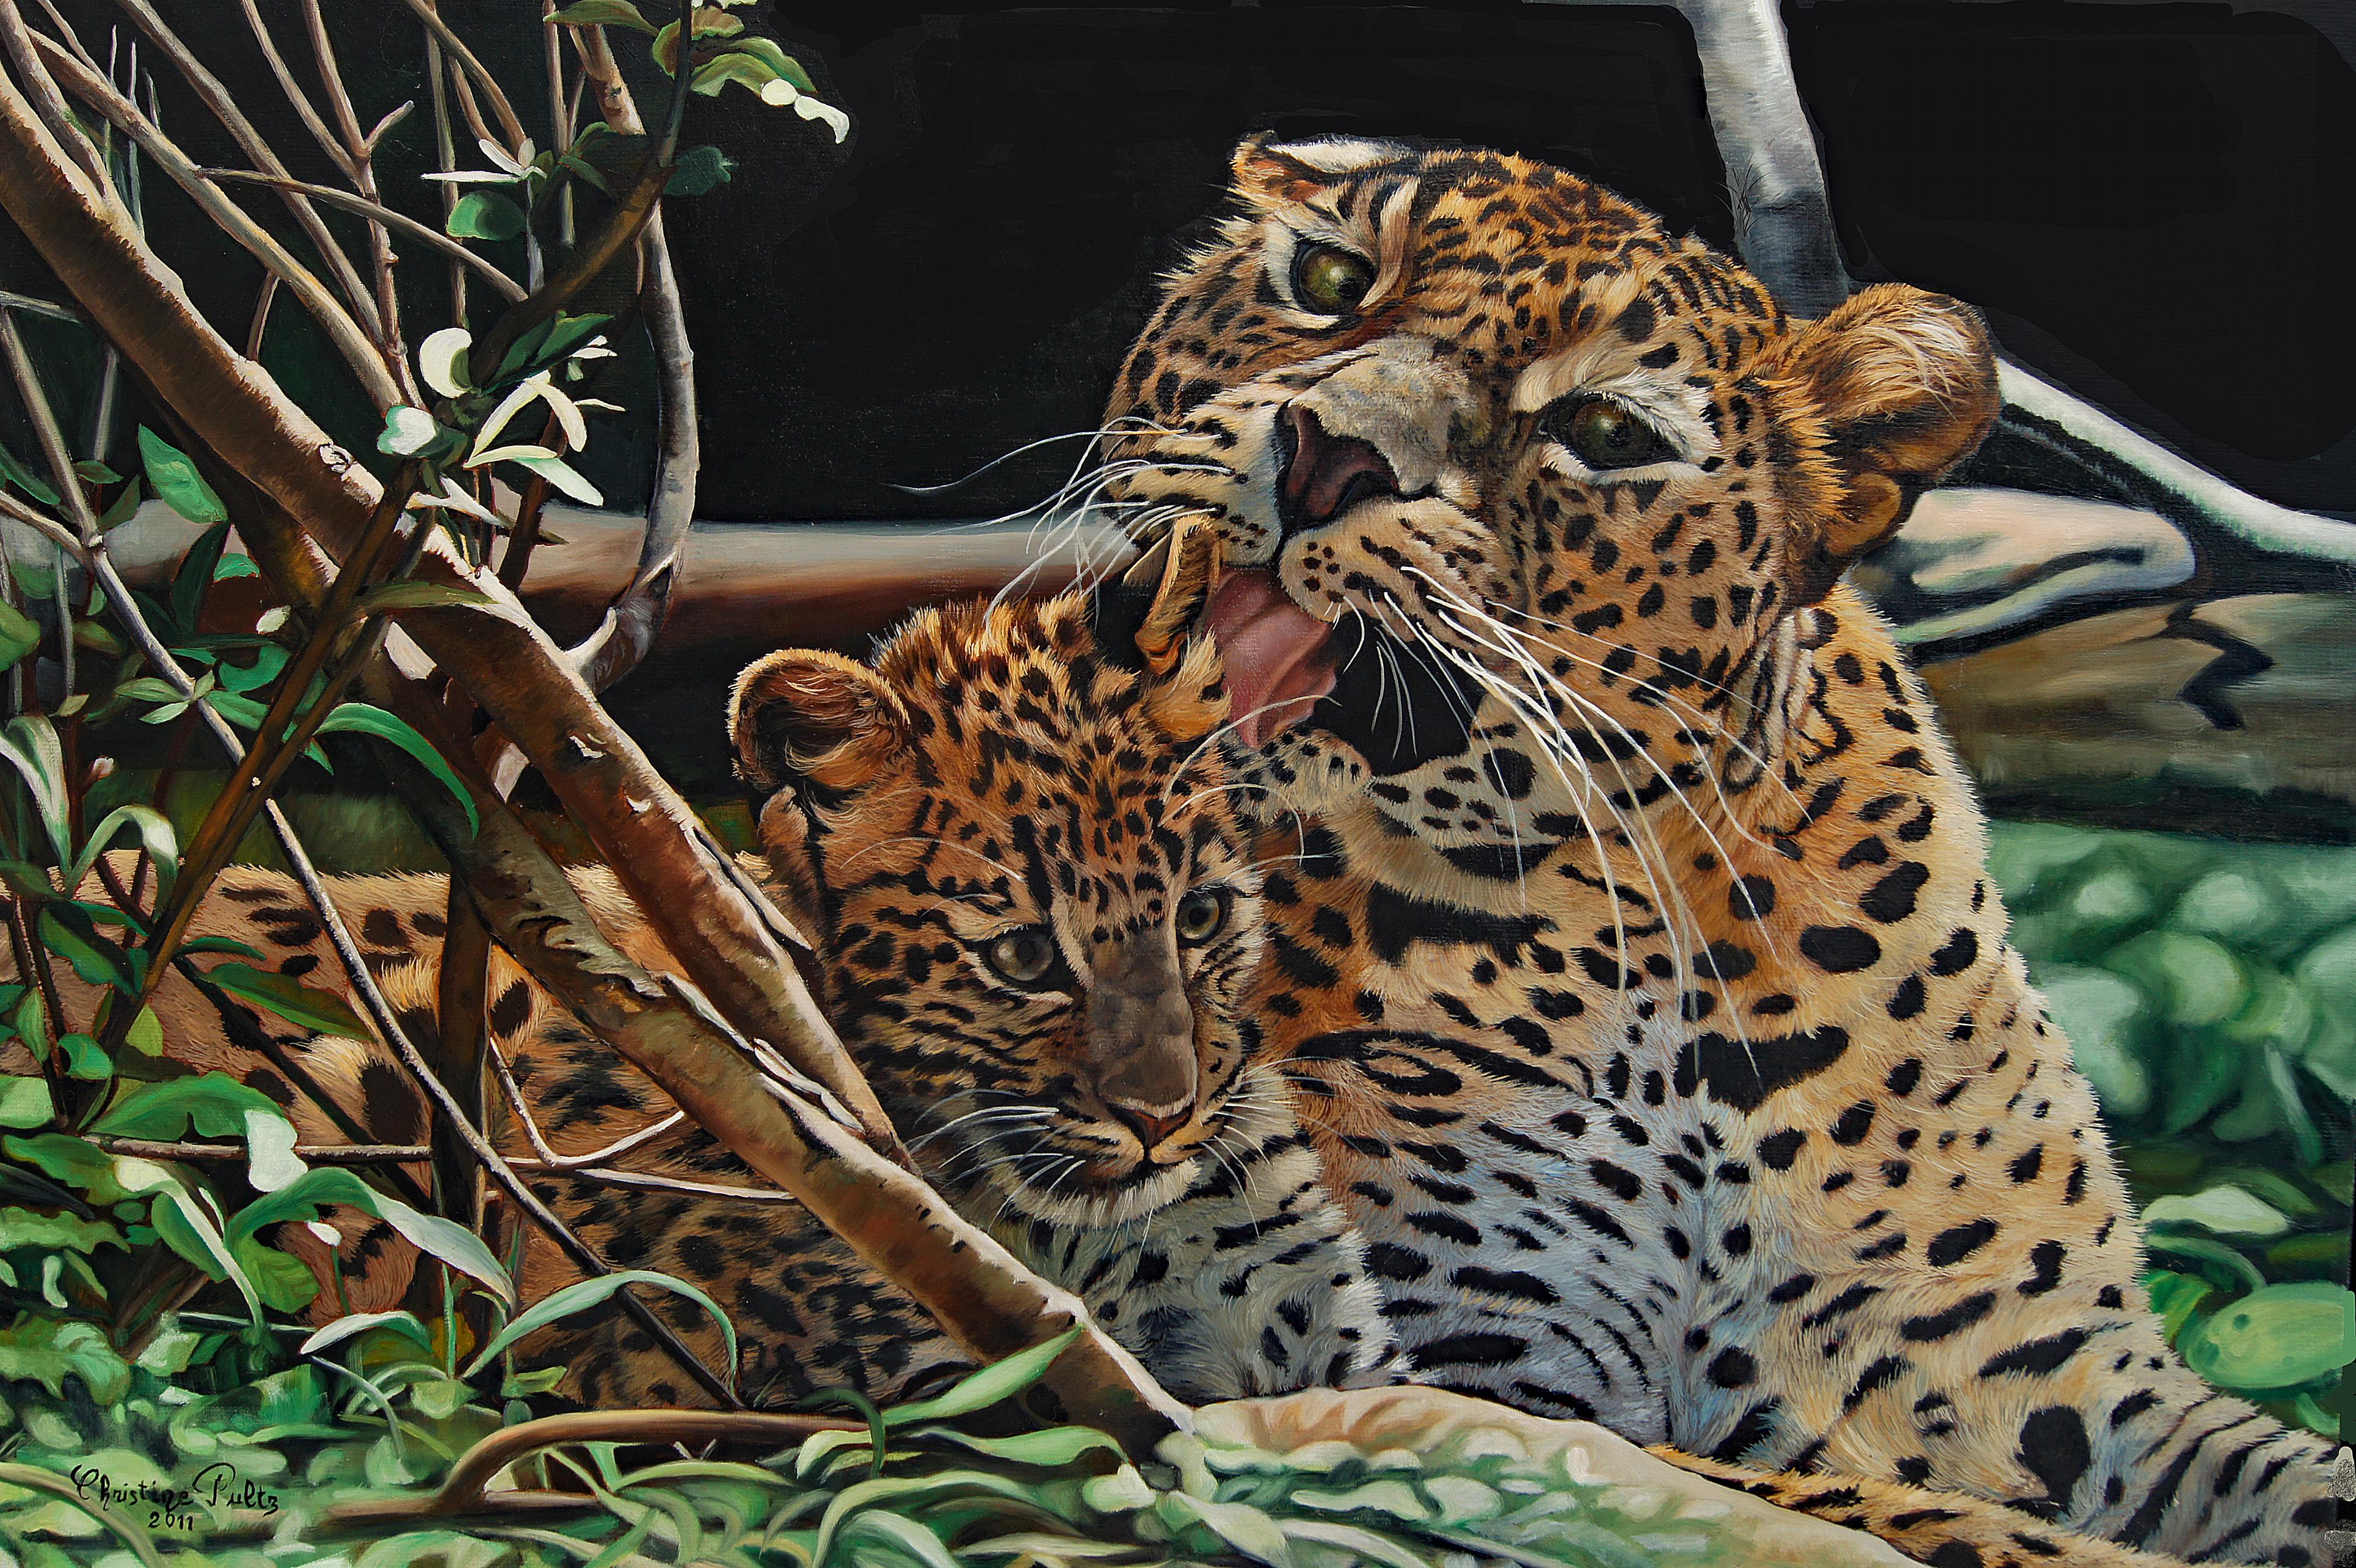 French Contemporary Animal Painting by Christine Pultz - The Sri Lankans